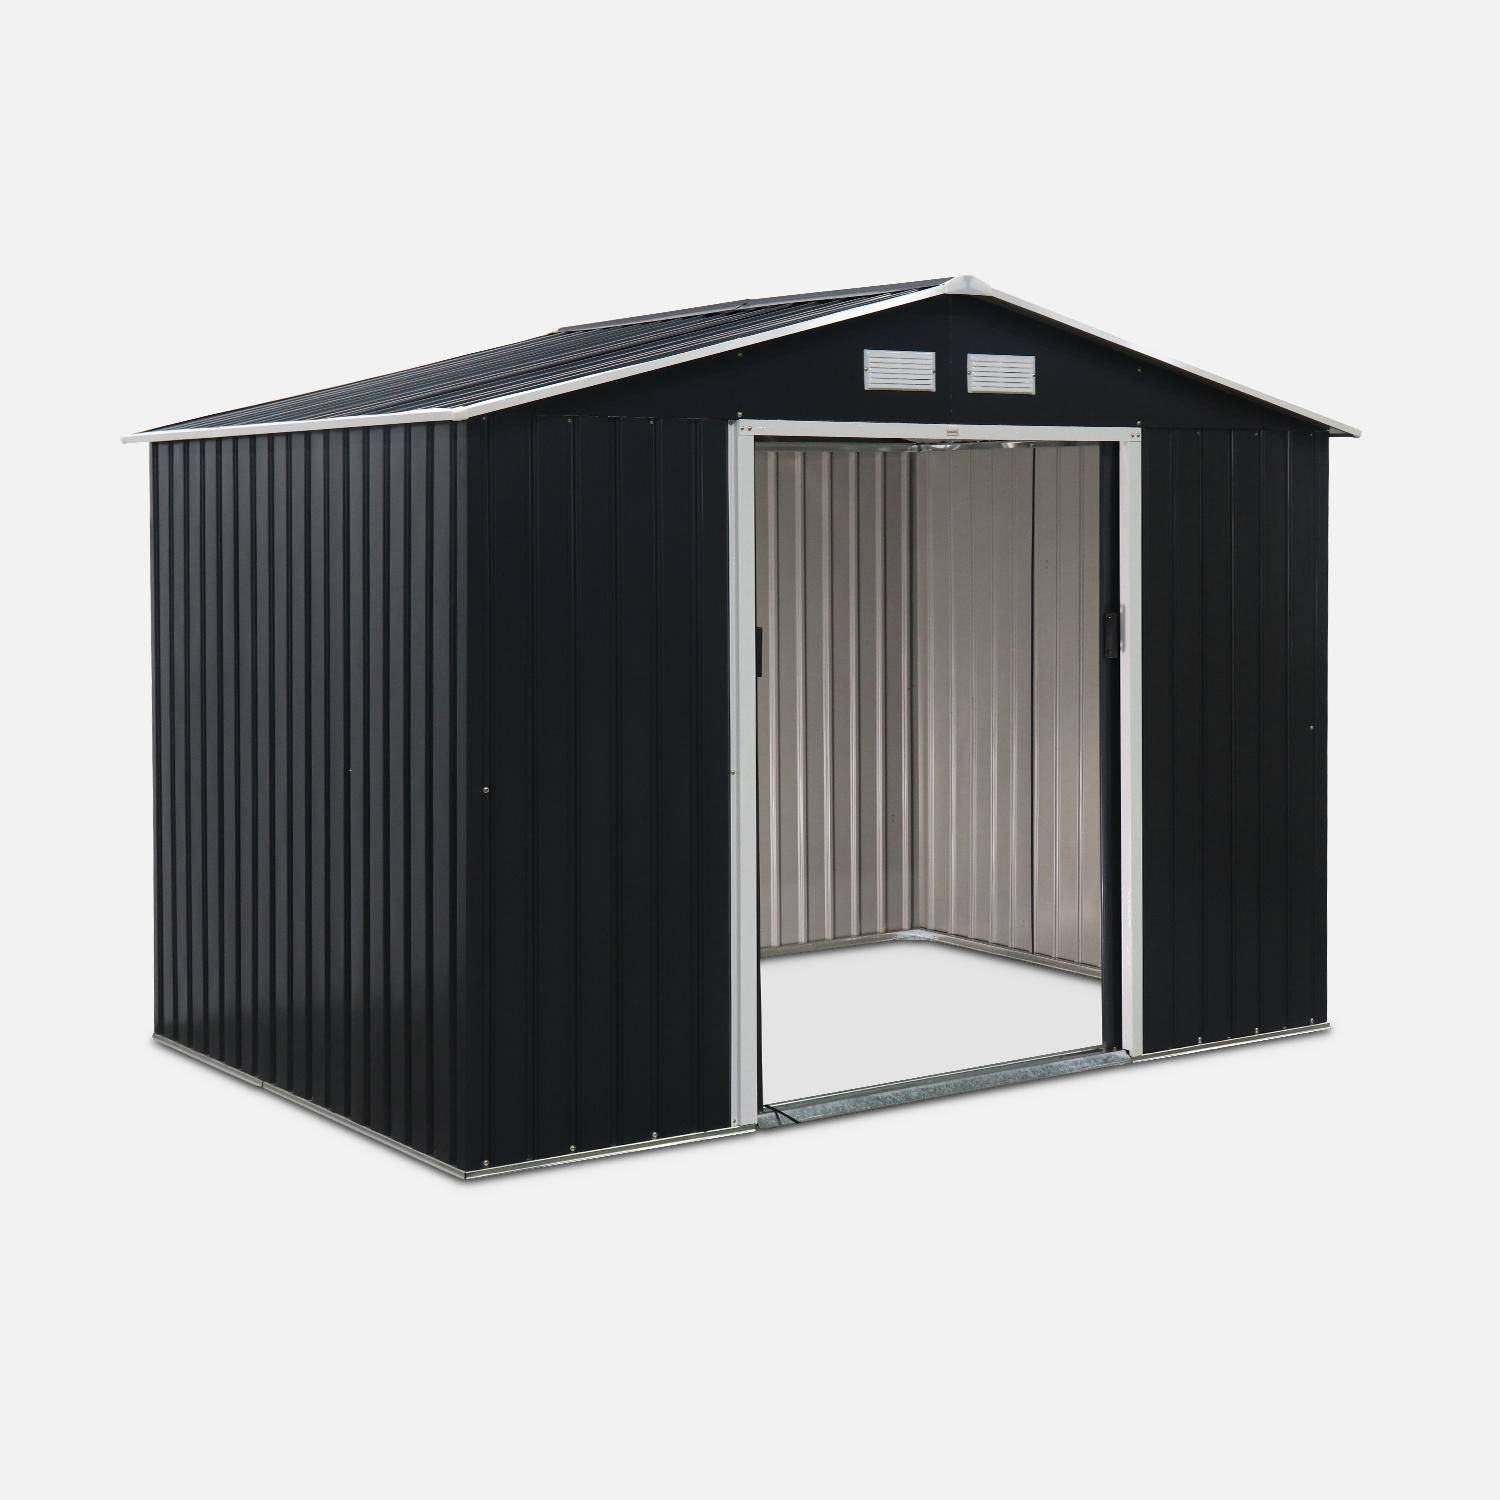 (9 X 6FT) 5.39m² Metal garden shed - Tool shed with single latch door, ground fixing kit supplied - Ferrain - Grey and White,sweeek,Photo4